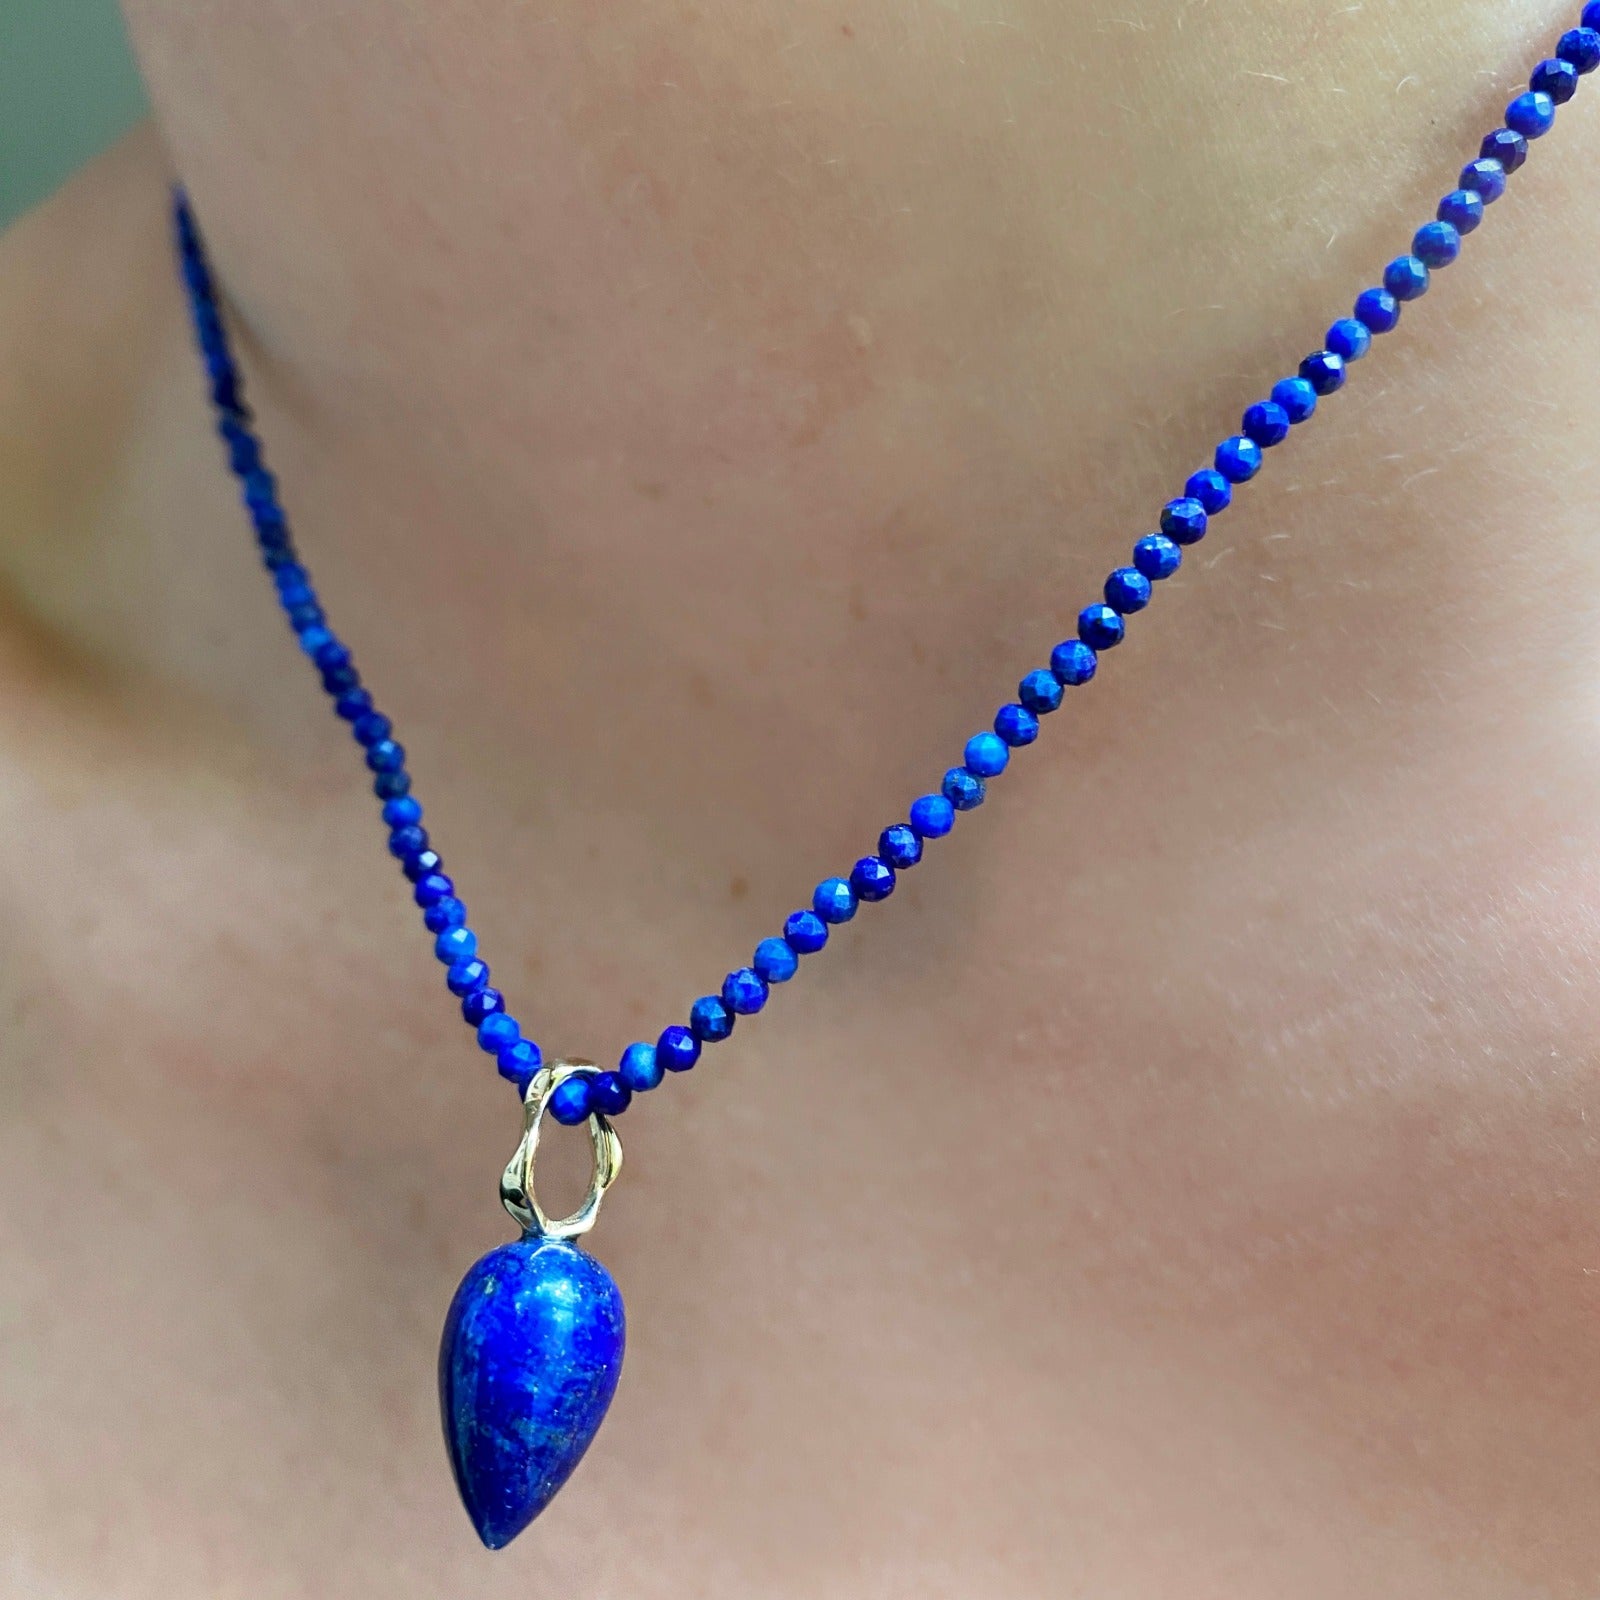 Lapis acorn drop charm. Styled on a neck hanging from a beaded necklace.